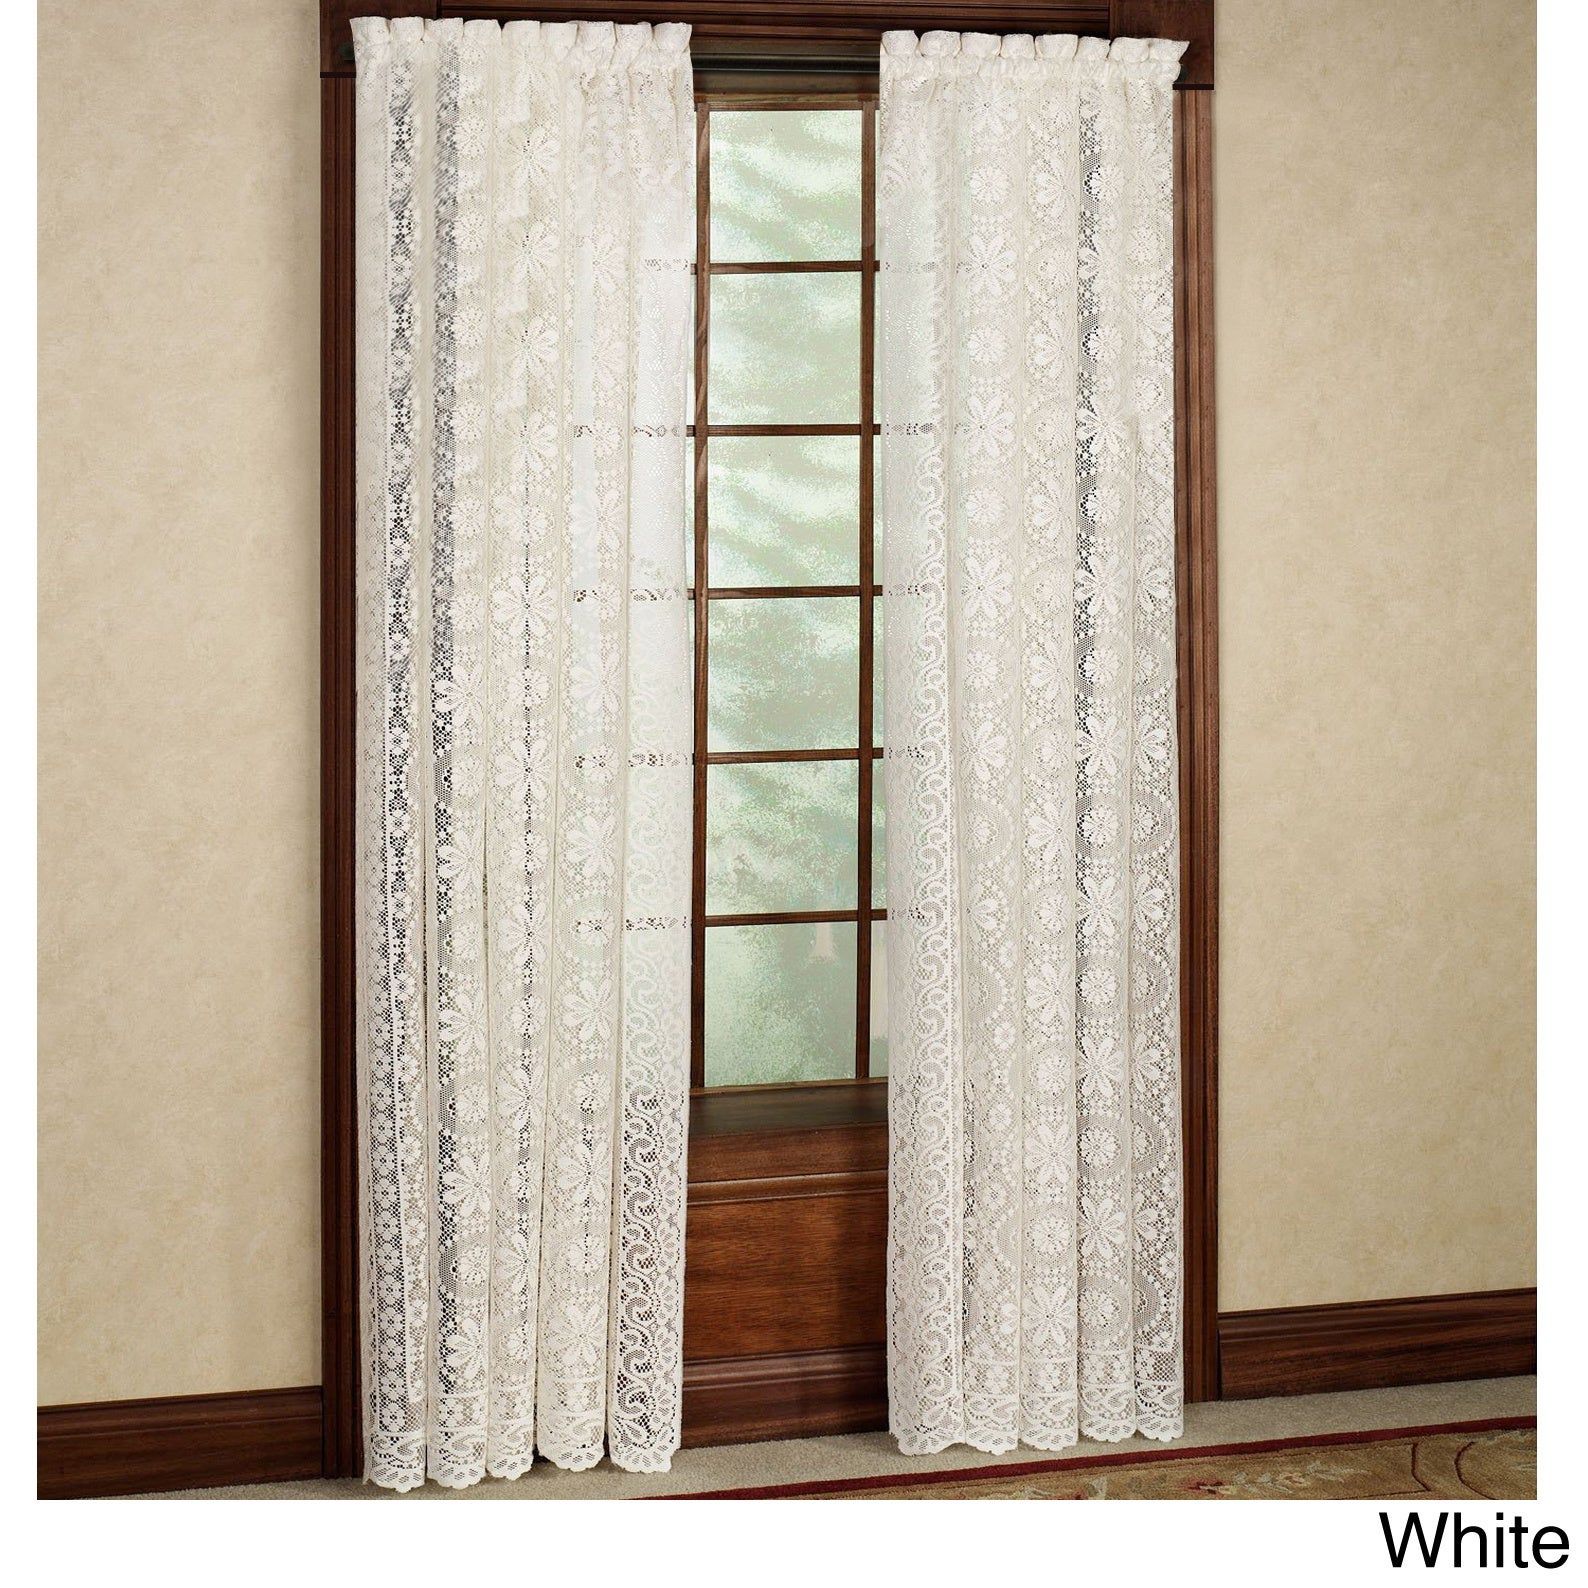 Luxurious Old World Style Lace Window Curtain Panel With Regard To Luxurious Old World Style Lace Window Curtain Panels (Photo 1 of 20)